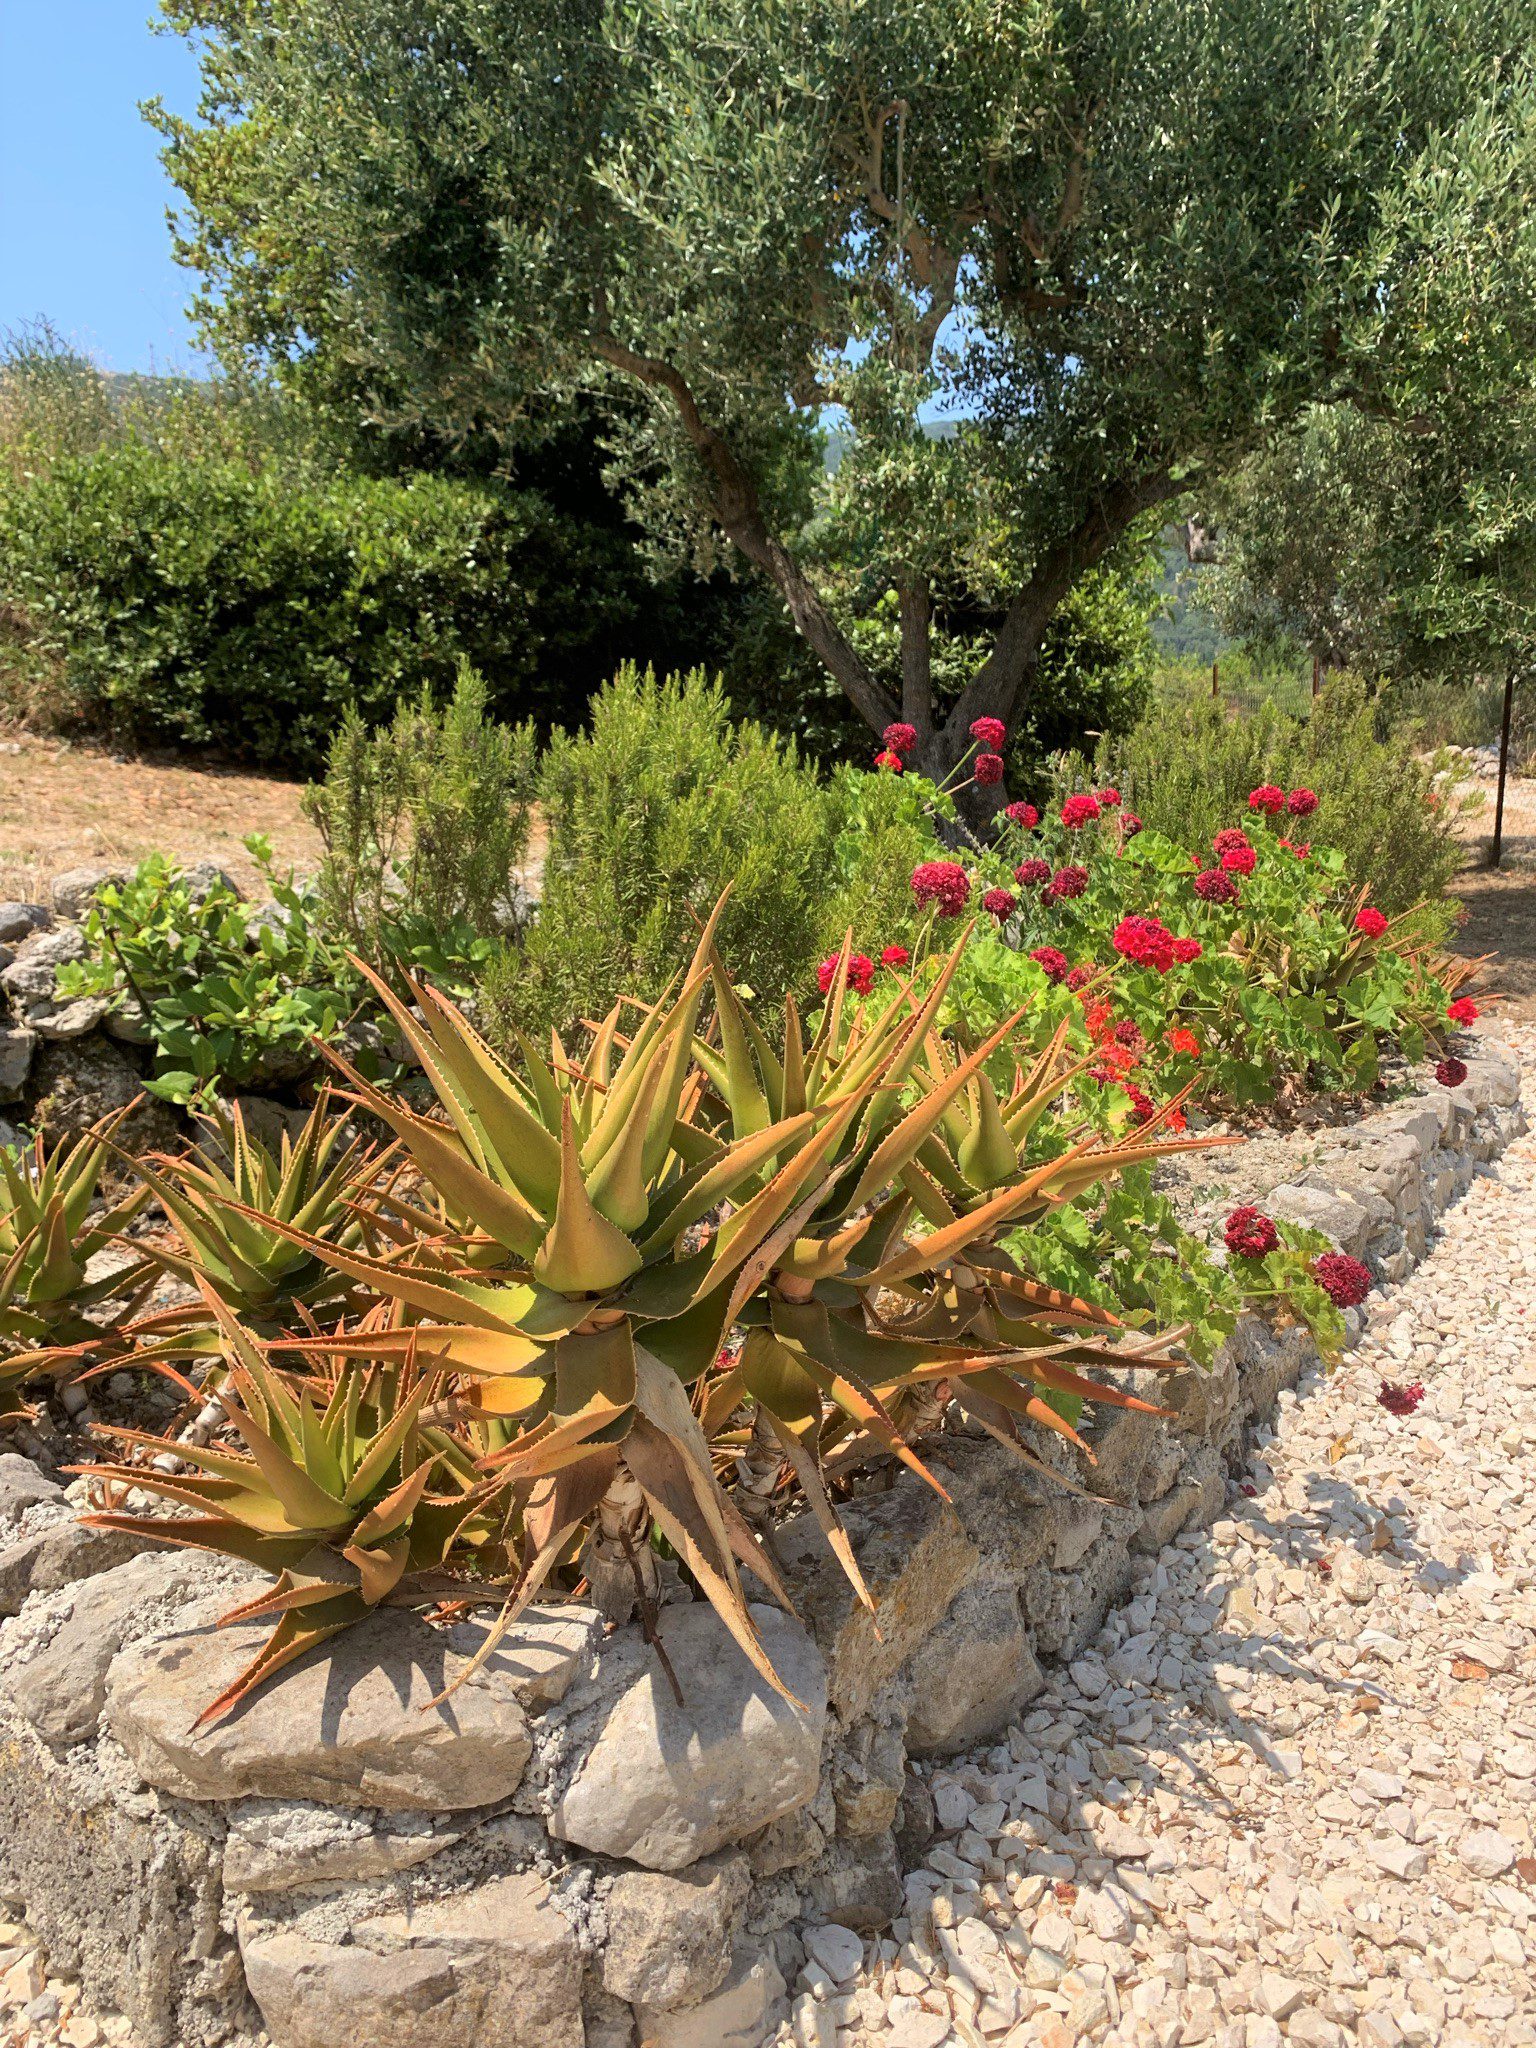 Garden and terrace of house for sale in Ithaca Greece,Ag Saranta